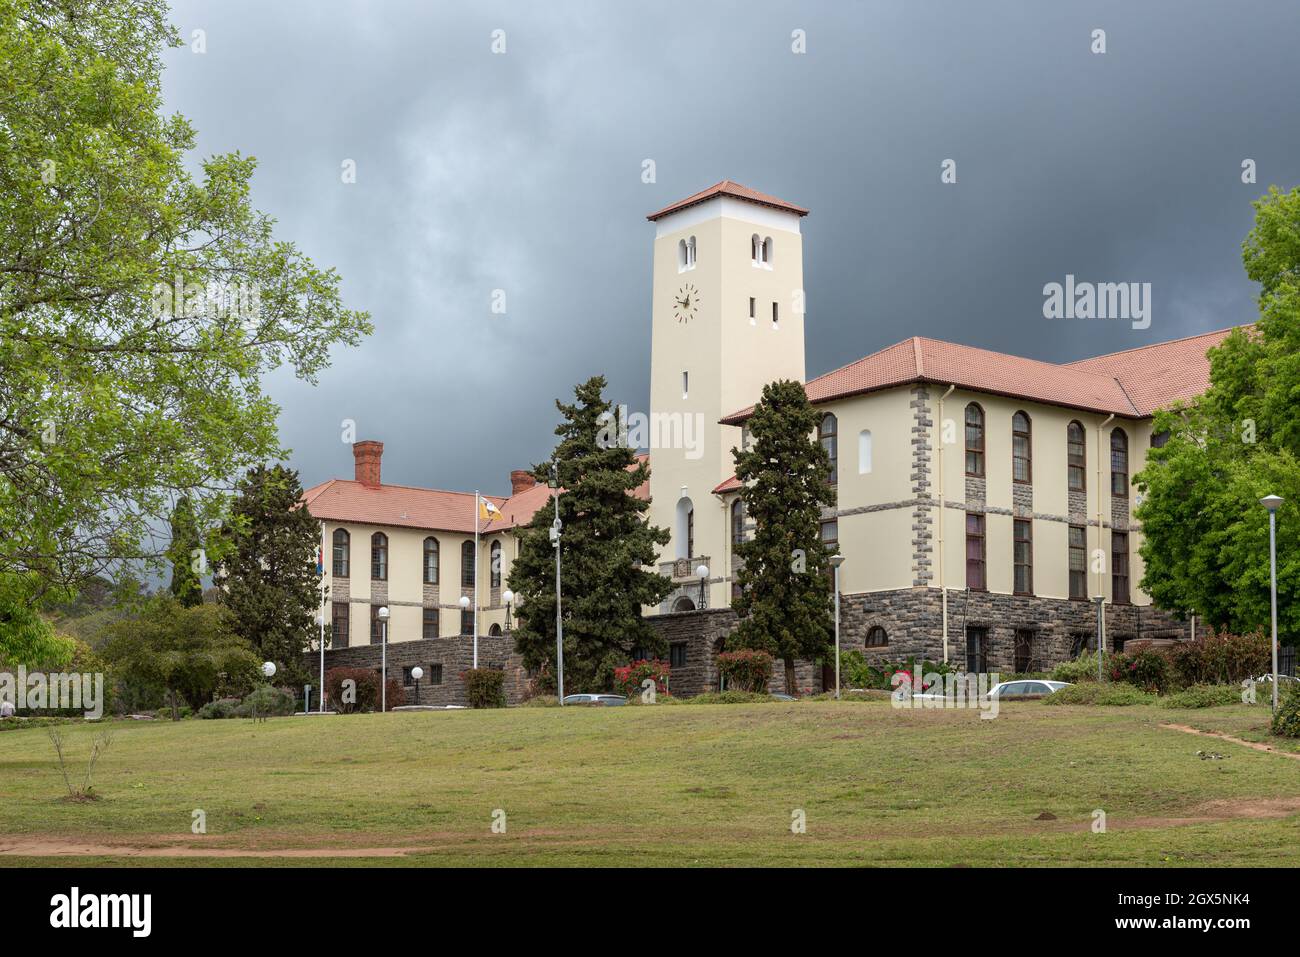 Main administration building and clock tower of Rhodes University designed by Sir Herbert Baker, Grahamstown/Makhanda, South Africa, 04 October 2021. Stock Photo